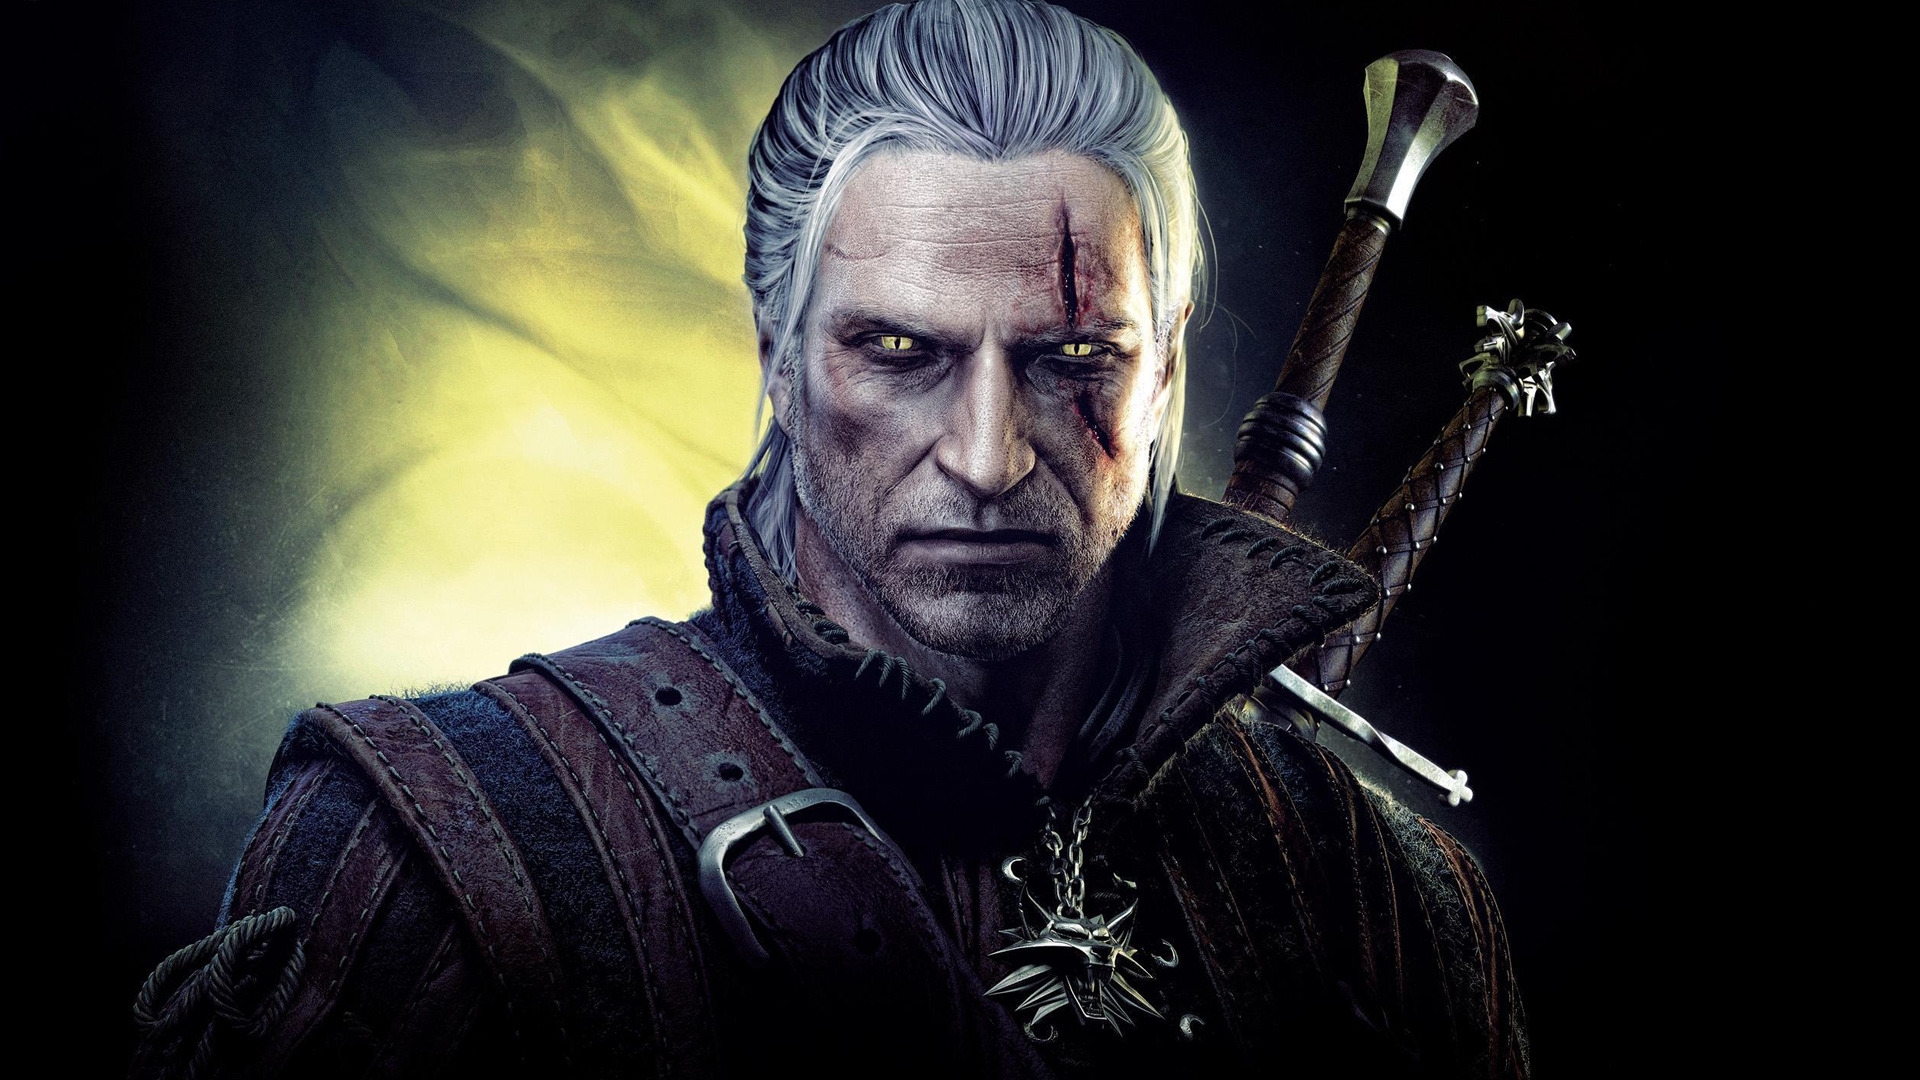 The Witcher 2 Assassins of Kings for 1920 x 1080 HDTV 1080p resolution